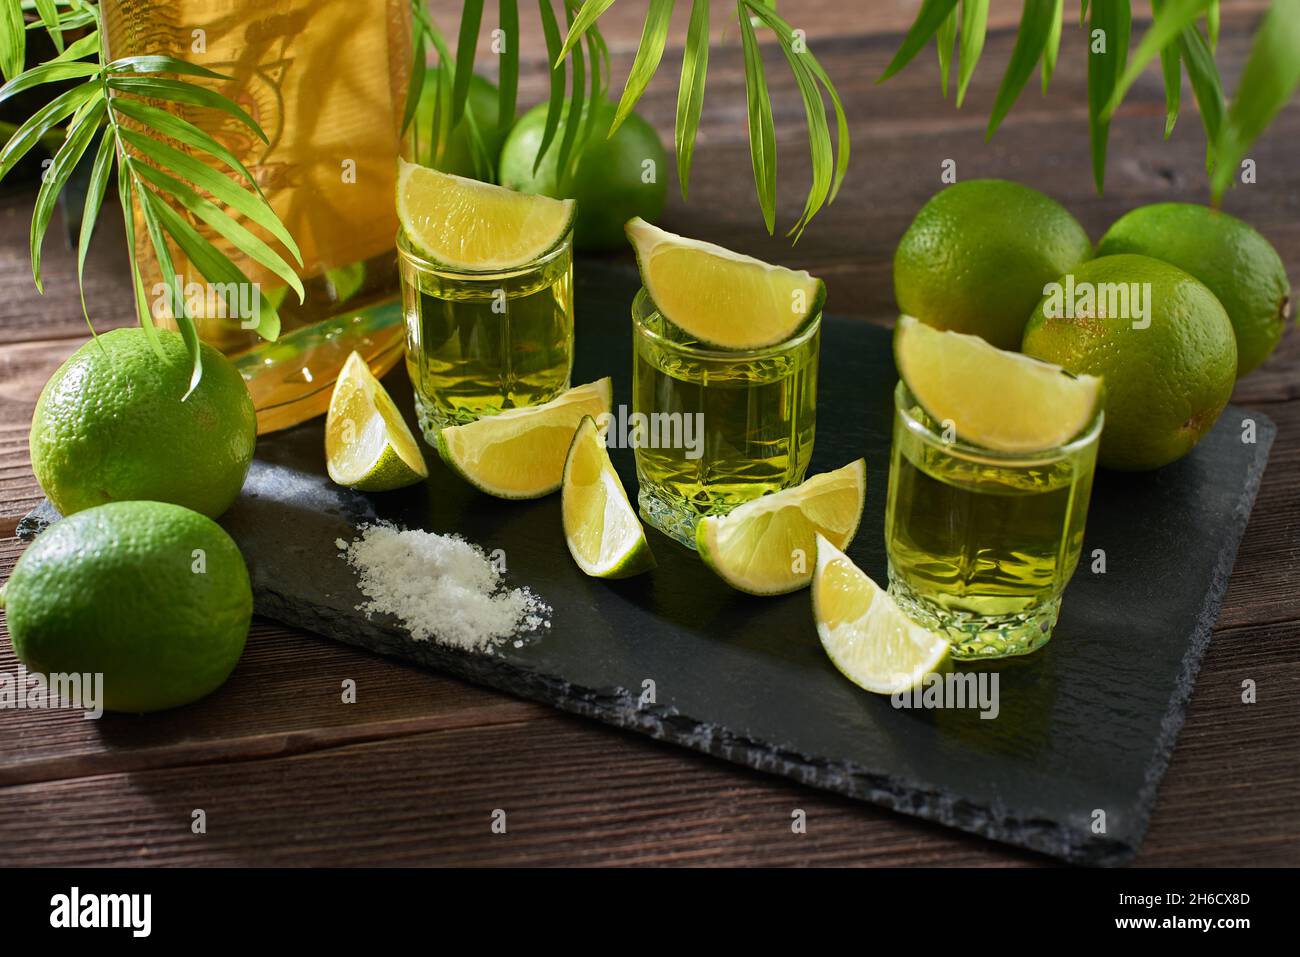 Bottle and glasses of tequila with lime on a wooden table. Traditional Mexican alcoholic beverage. Alcoholic cocktail with lime. The gin drink is serv Stock Photo